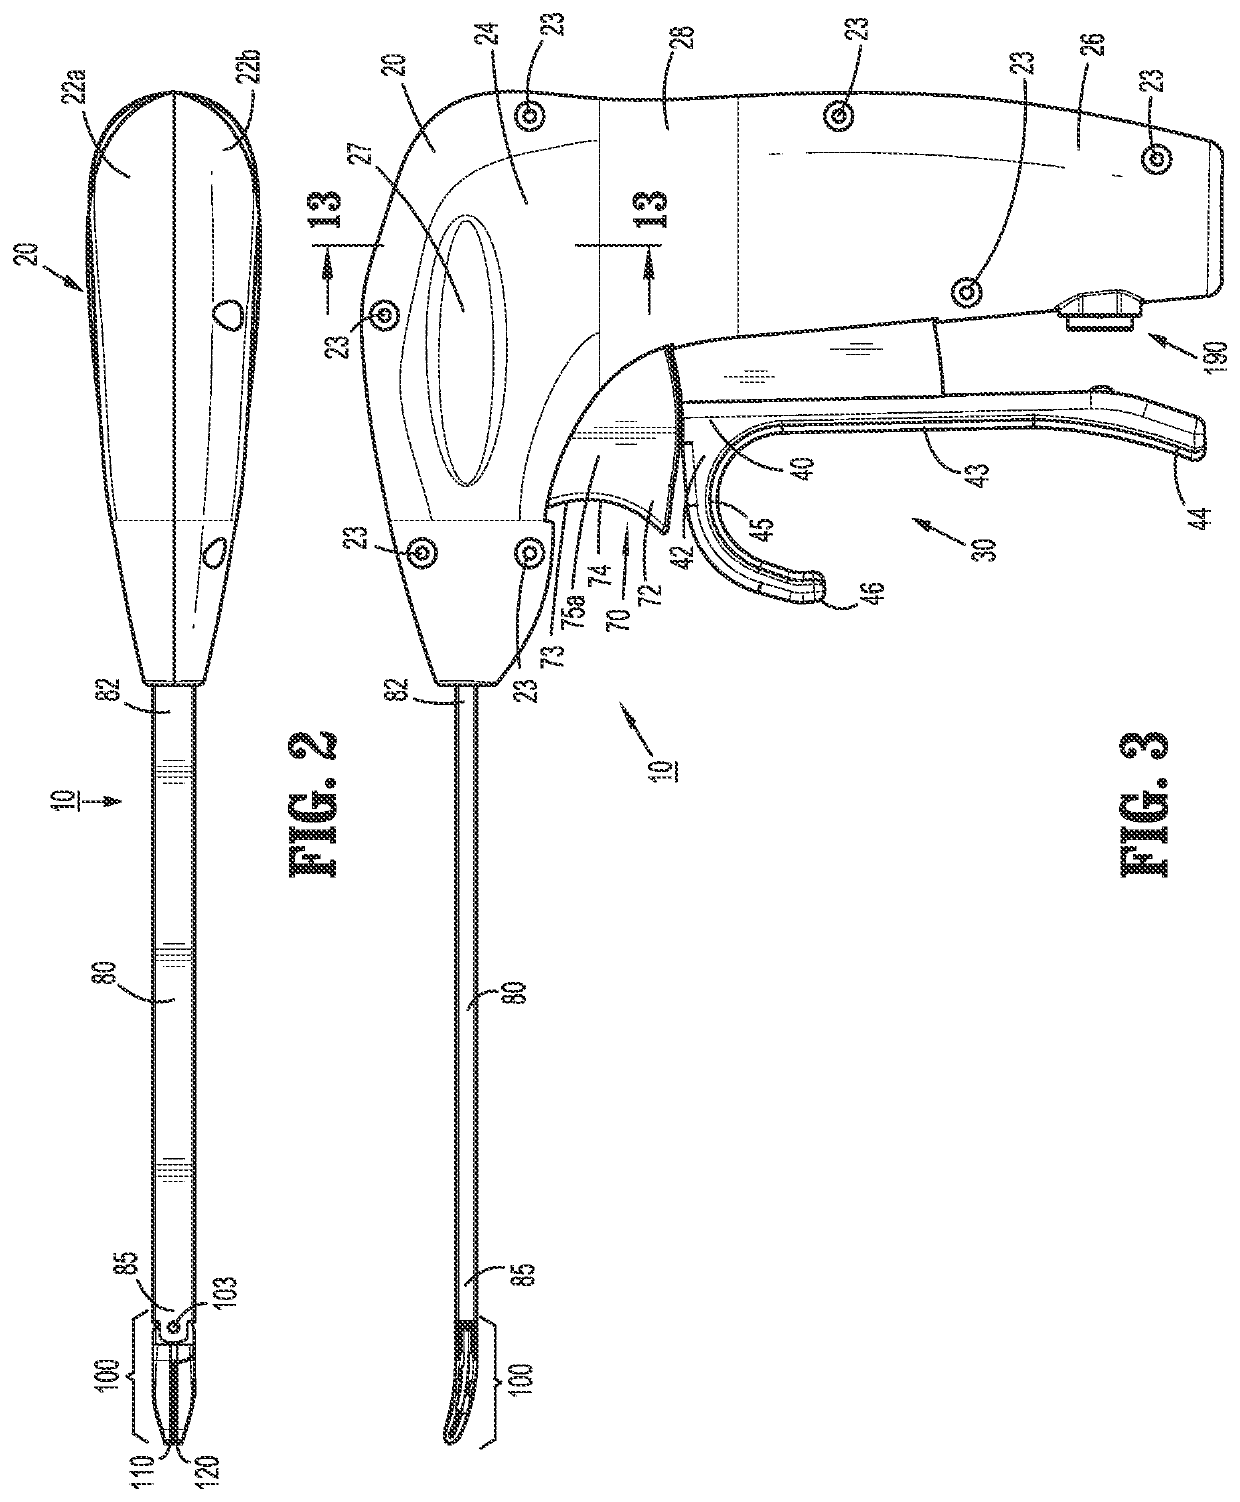 Surgical instruments and methods for performing tonsillectomy, adenoidectomy, and other surgical procedures